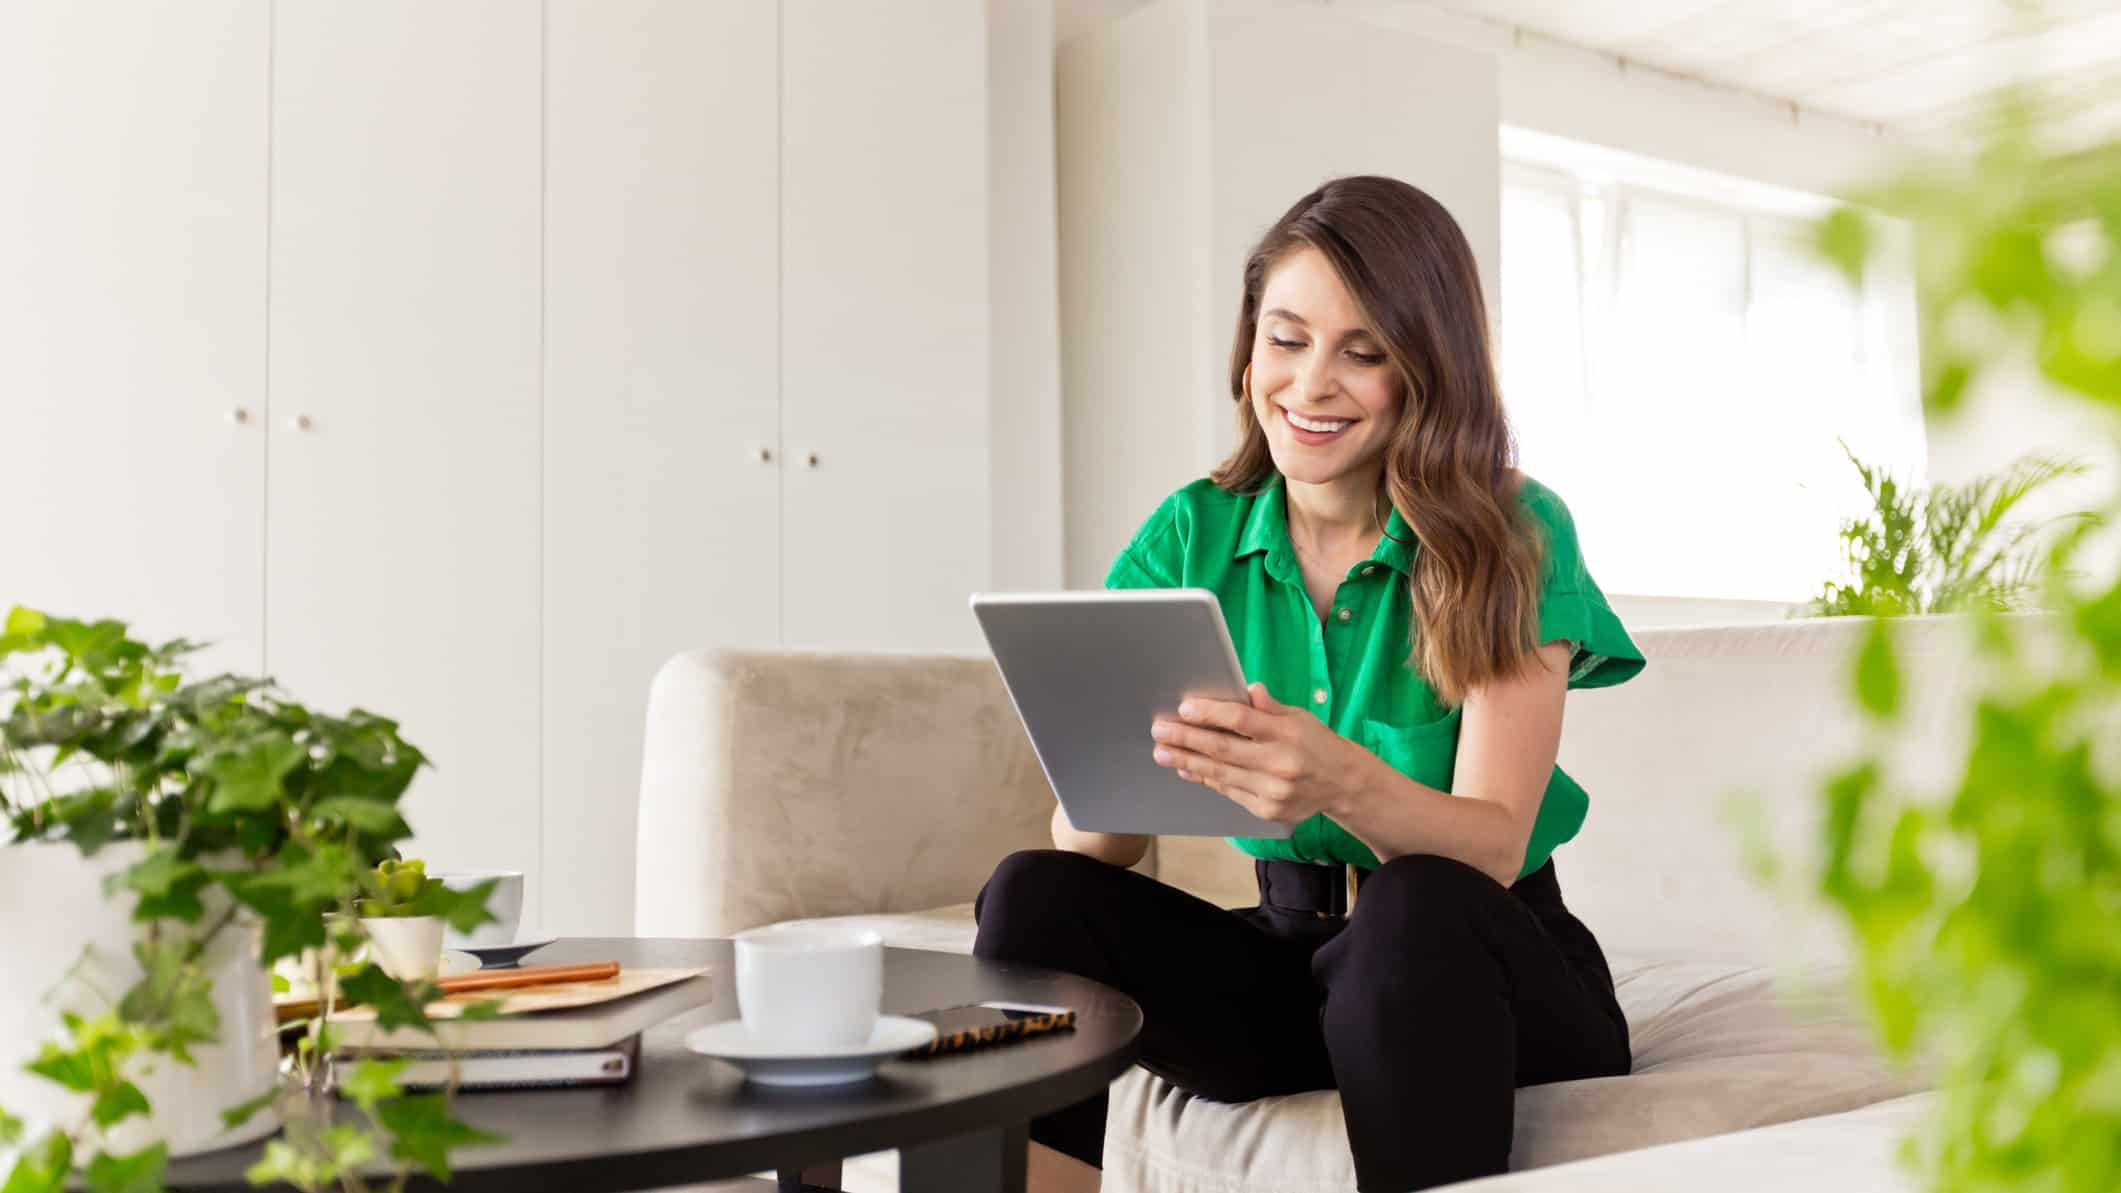 A happy woman smiles as she looks at a tablet in a room with green plantlife around her. She is also wearing a green shirt representing the rising Polynovo share price